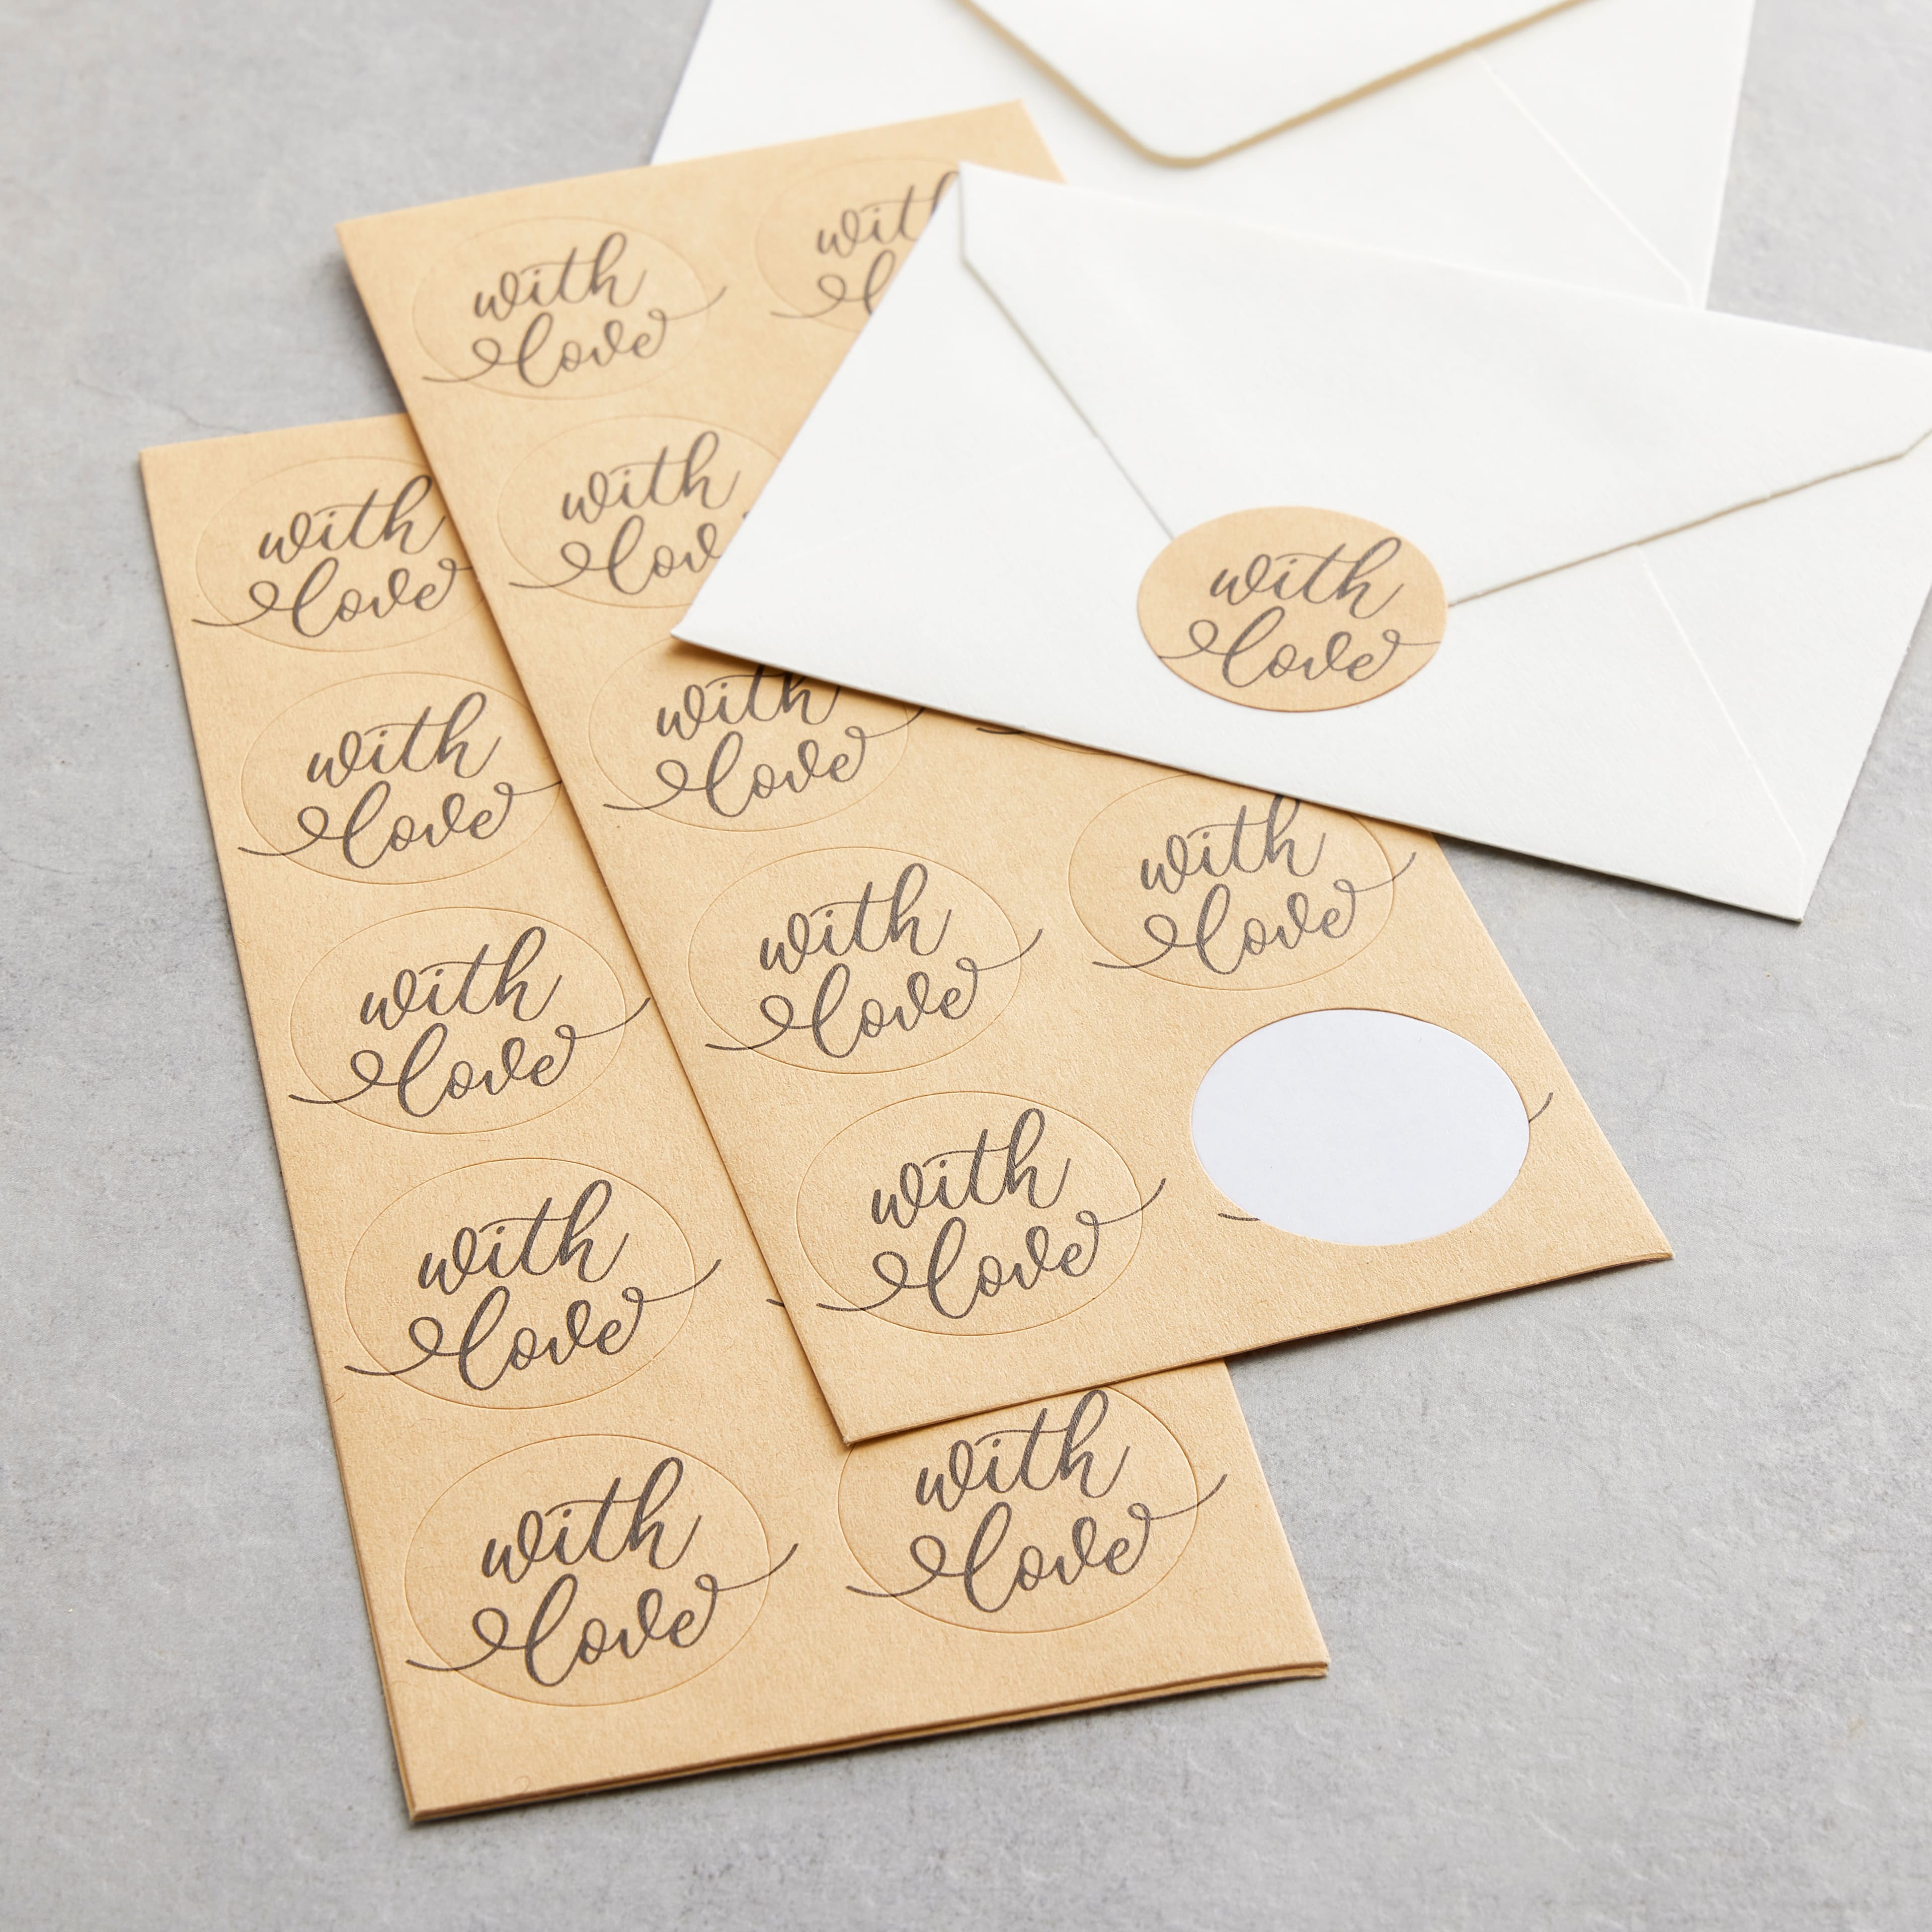 Recollections With Love Envelope Seals - each